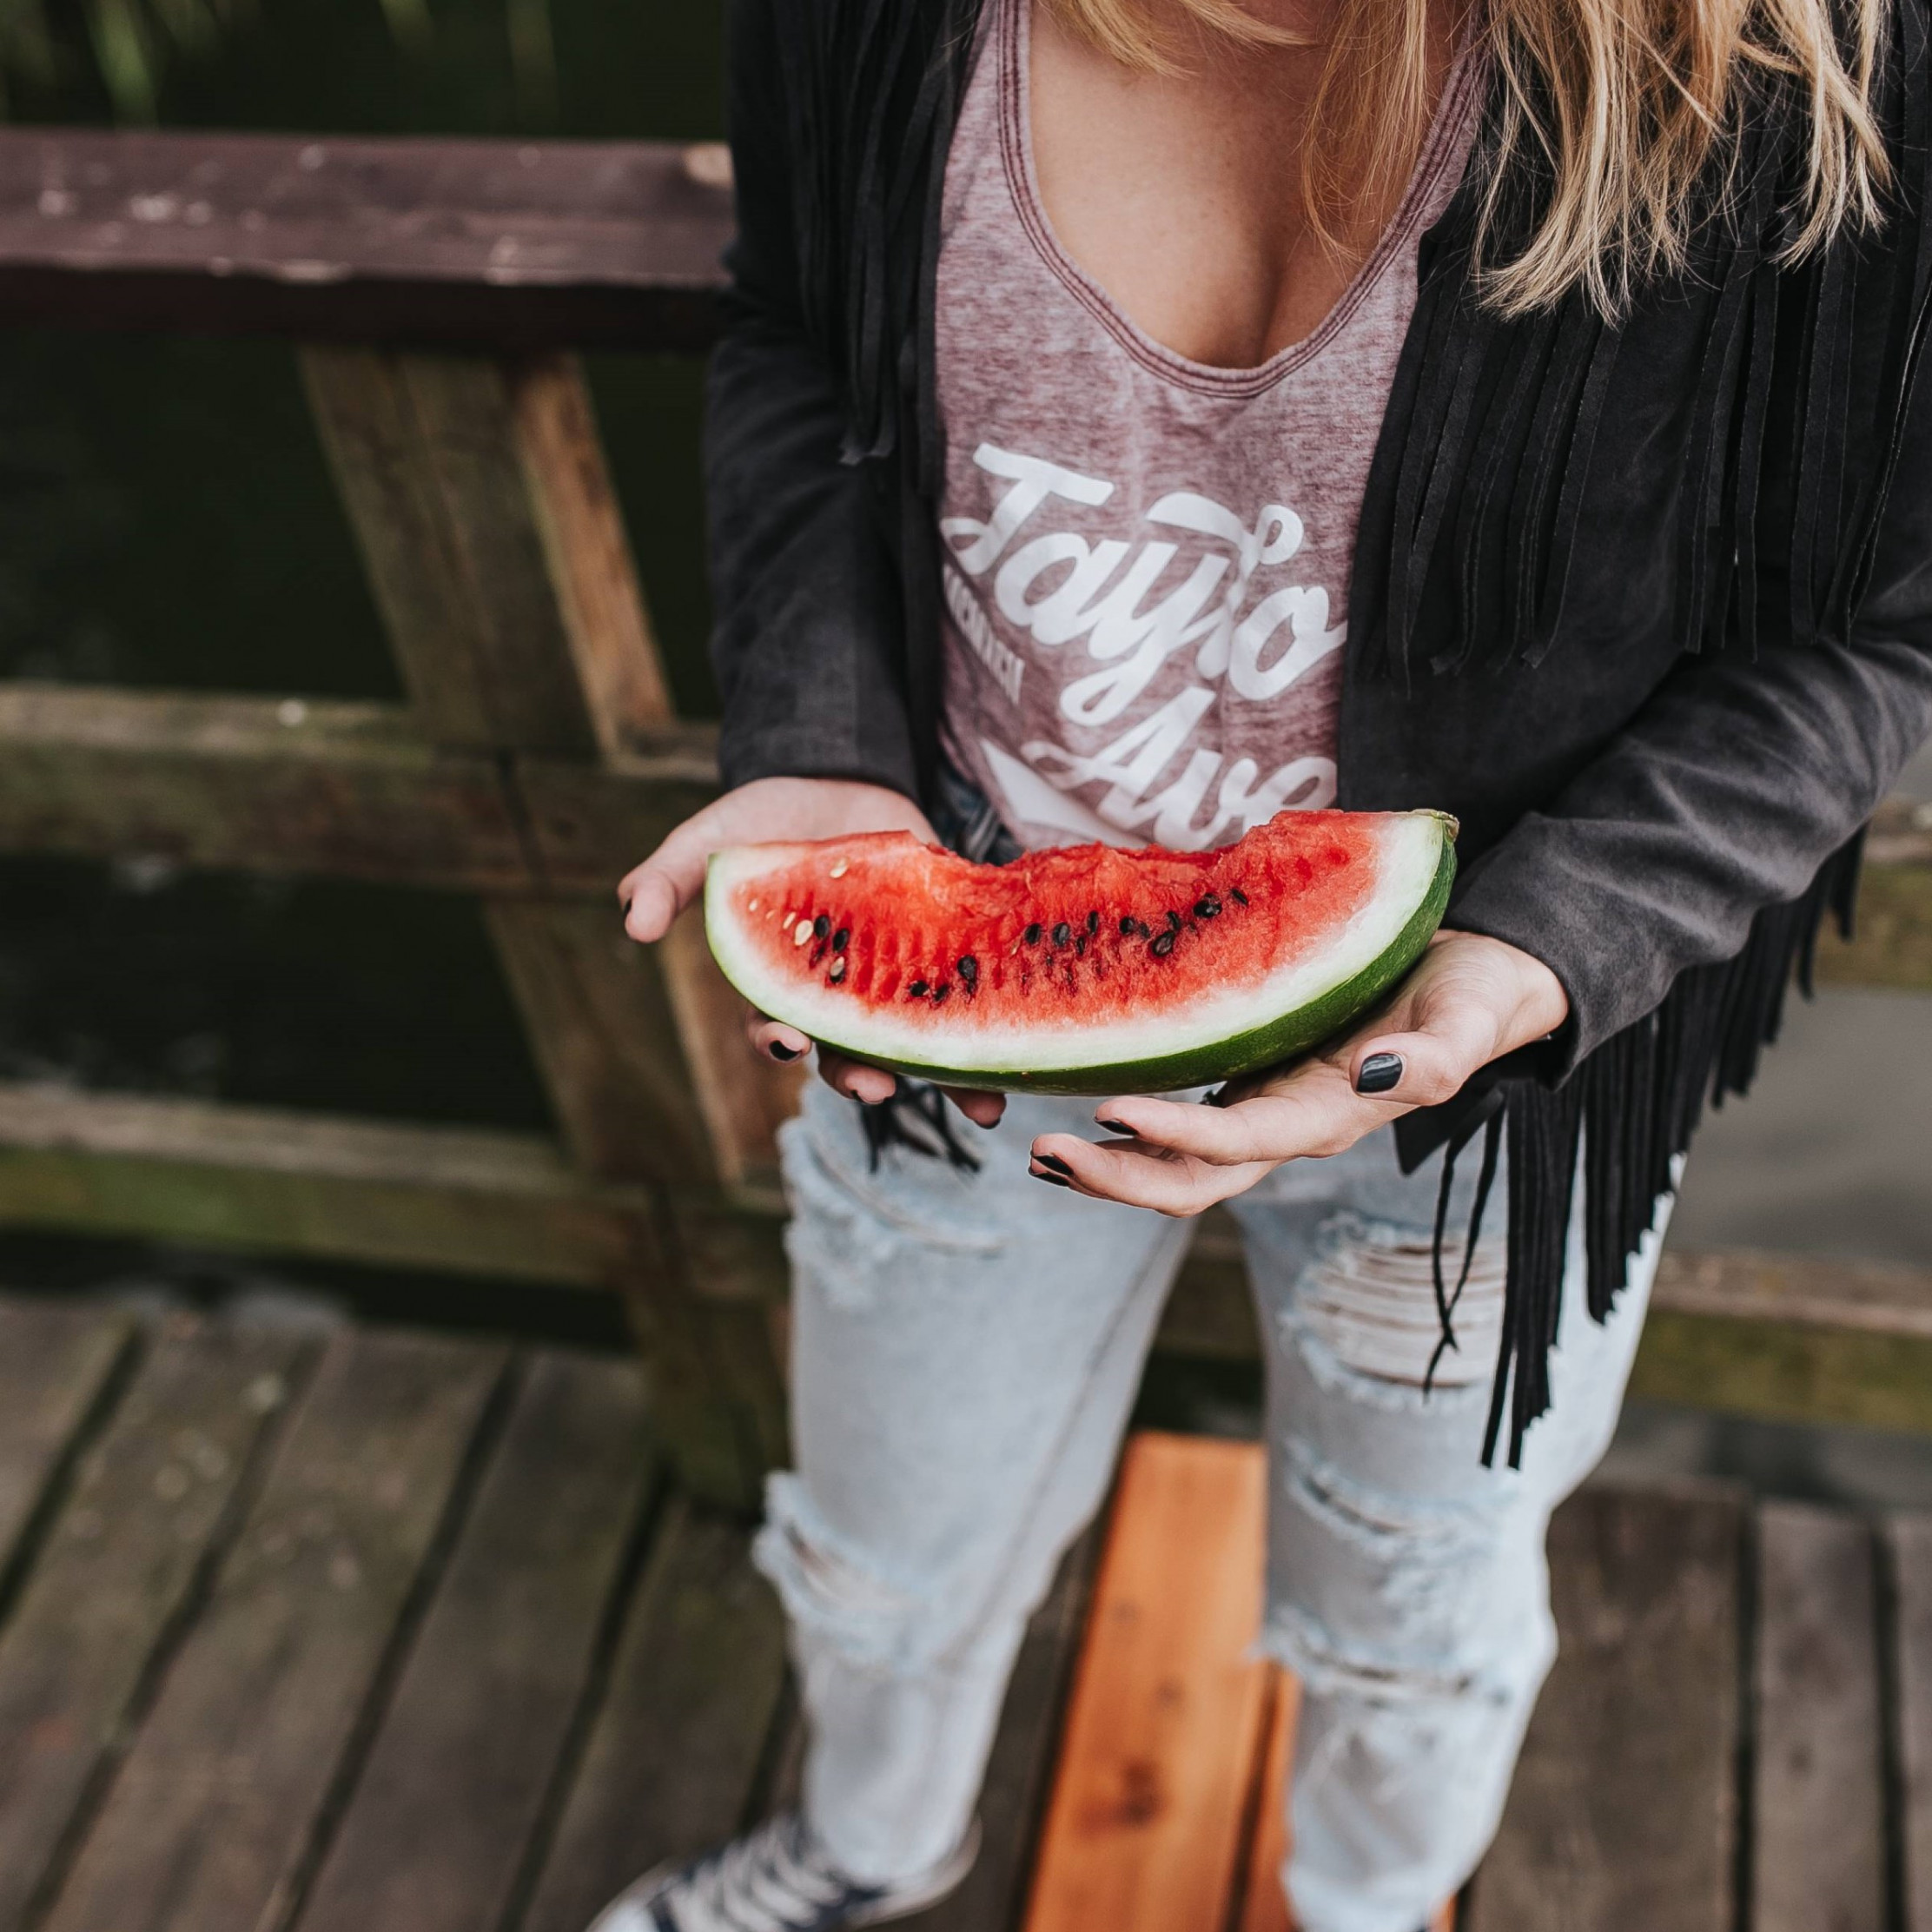 The girl with a watermelon slice wallpaper 2224x2224